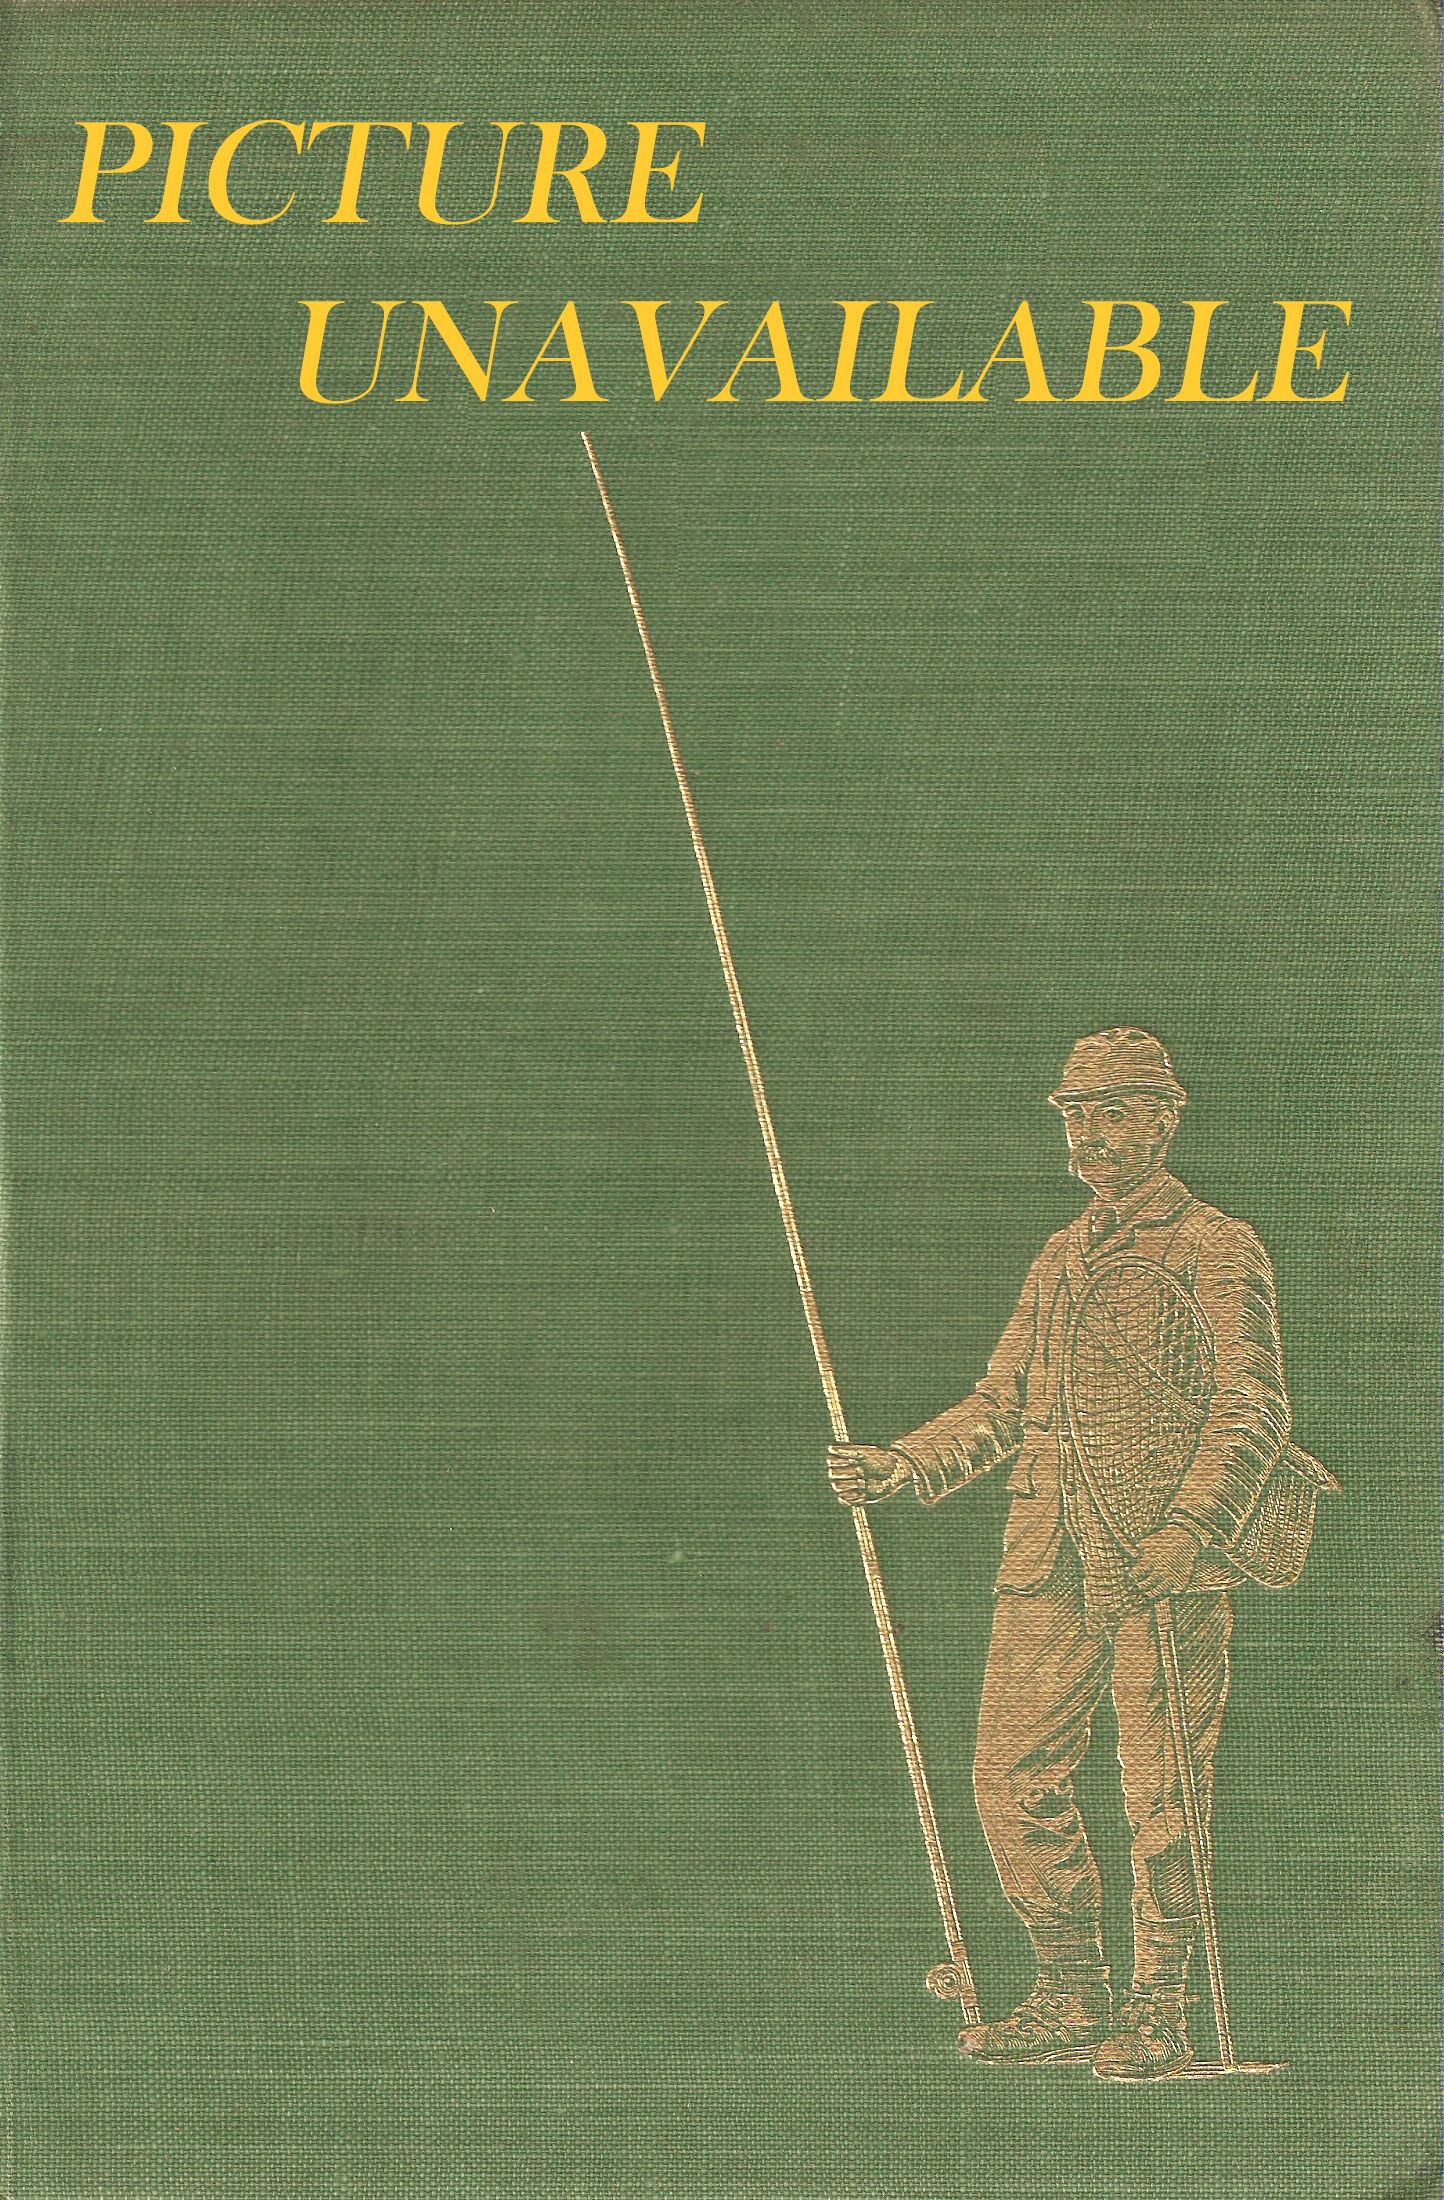 THE COMPLETE GUNDOG. Compiled by John Humphreys.